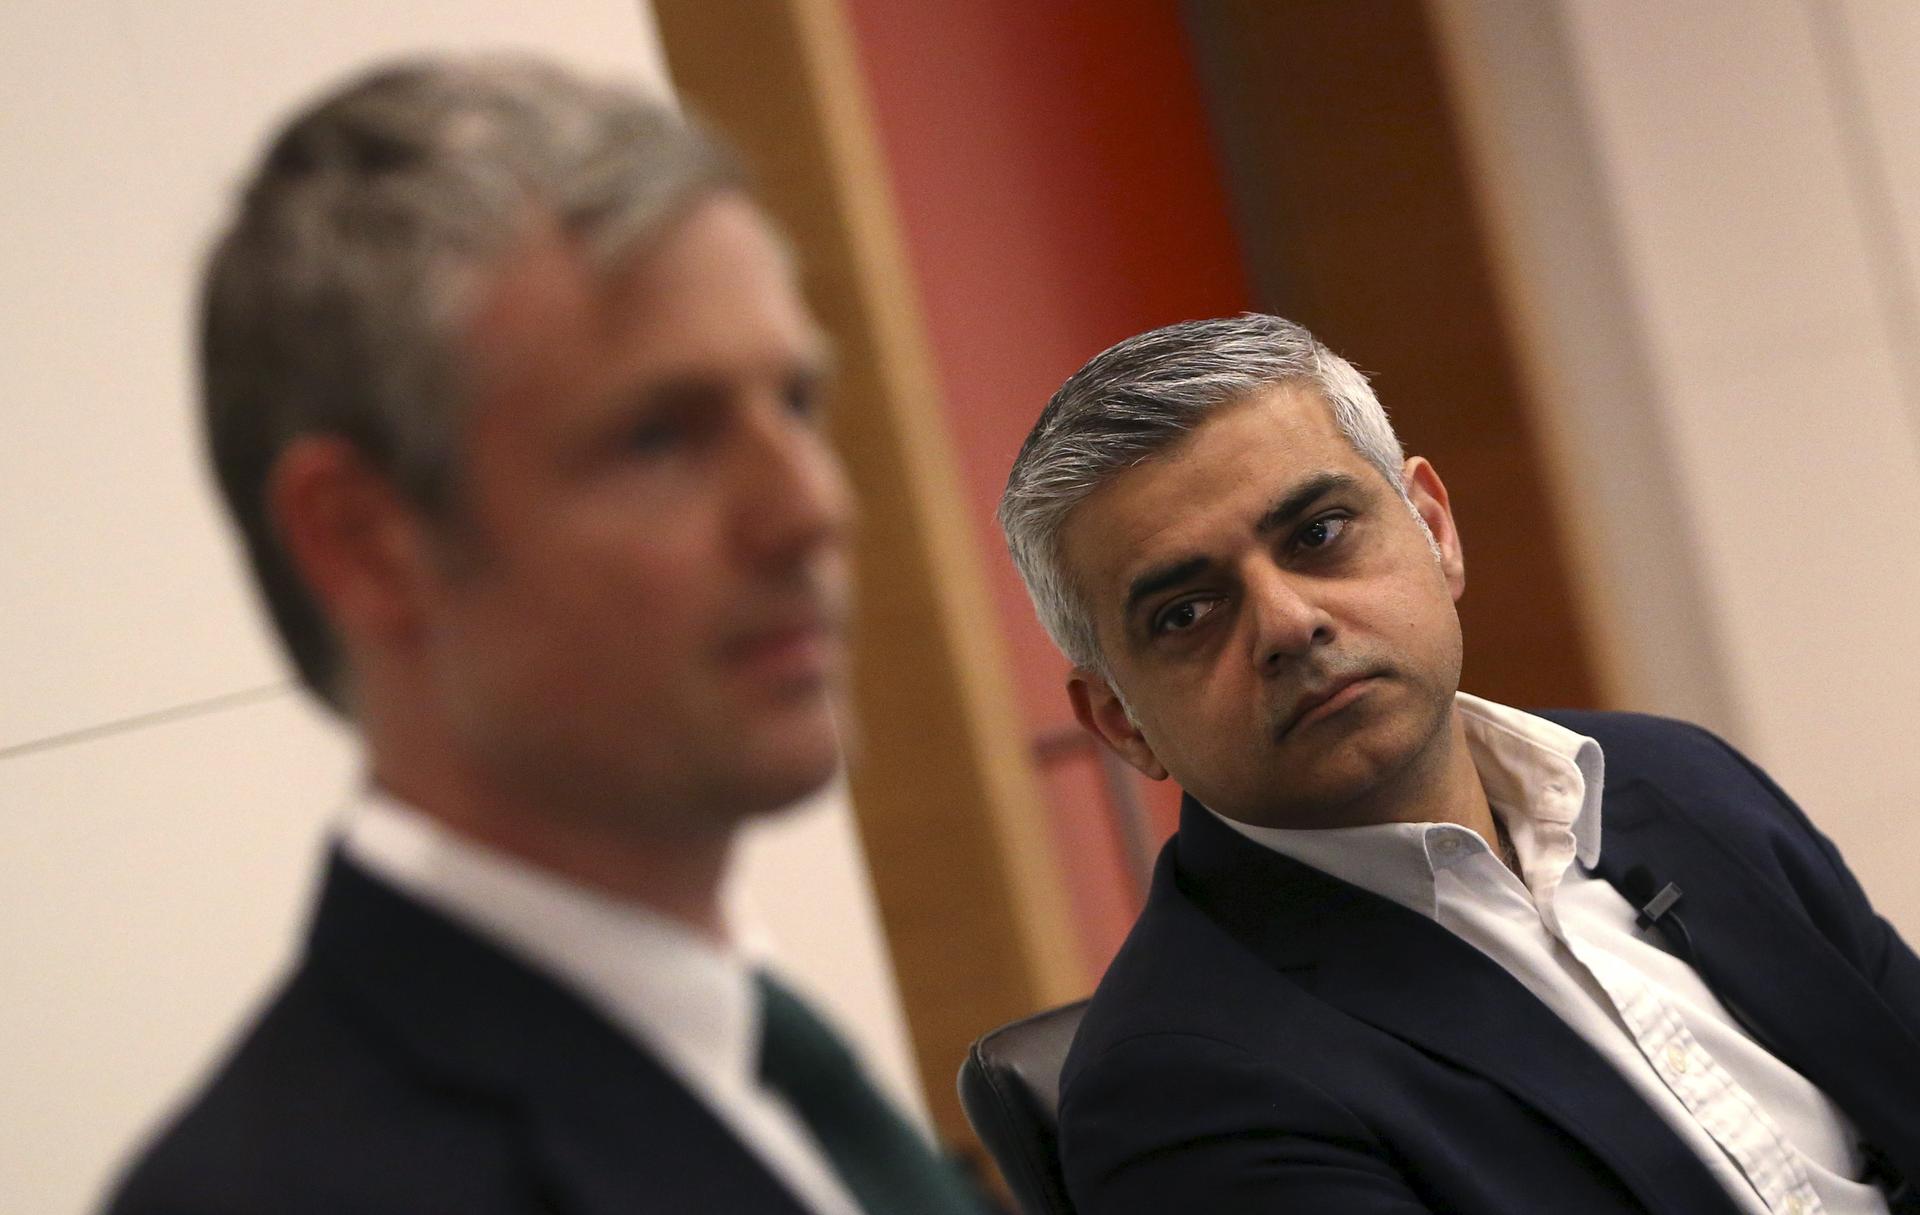 Britain's Labour Party candidate for Mayor of London, Sadiq Khan (R) looks at Conservative party candidate Zac Goldsmith during a hustings event in London, Britain March 23, 2016.